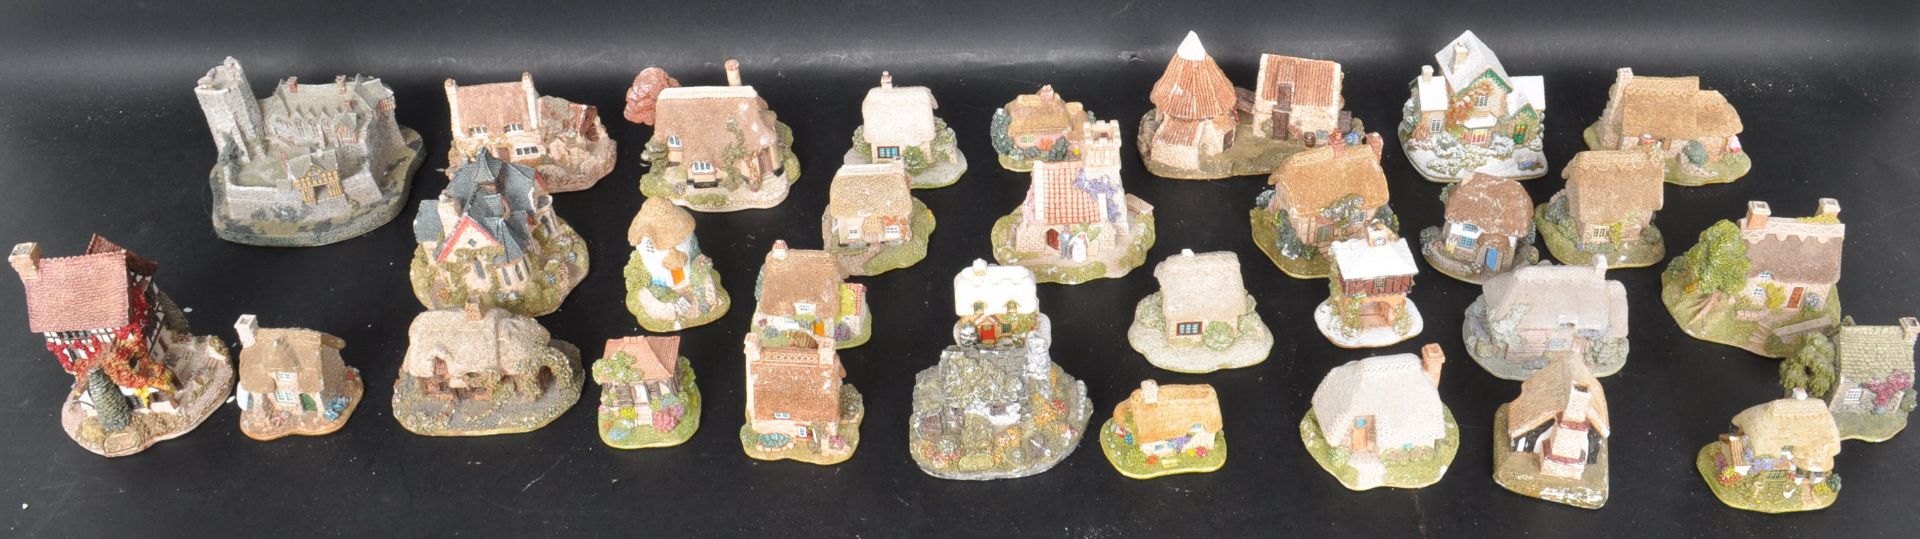 LARGE COLLECTION OF VINTAGE 20TH CENTURY LILLIPUT LANE - Image 5 of 7